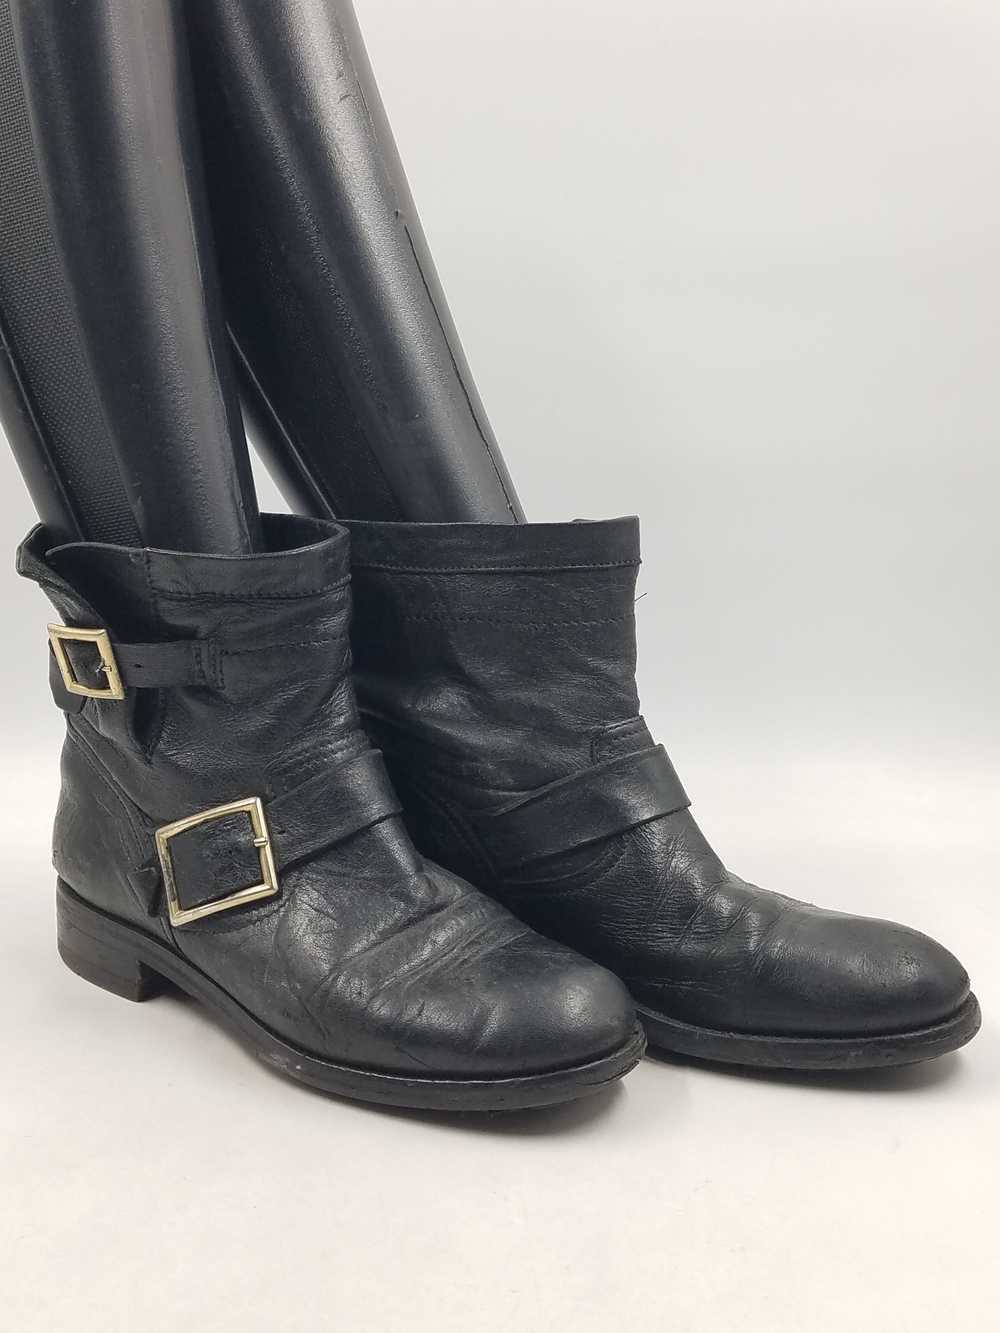 Authentic Jimmy Choo Black Engineer Boot W 8 - image 3